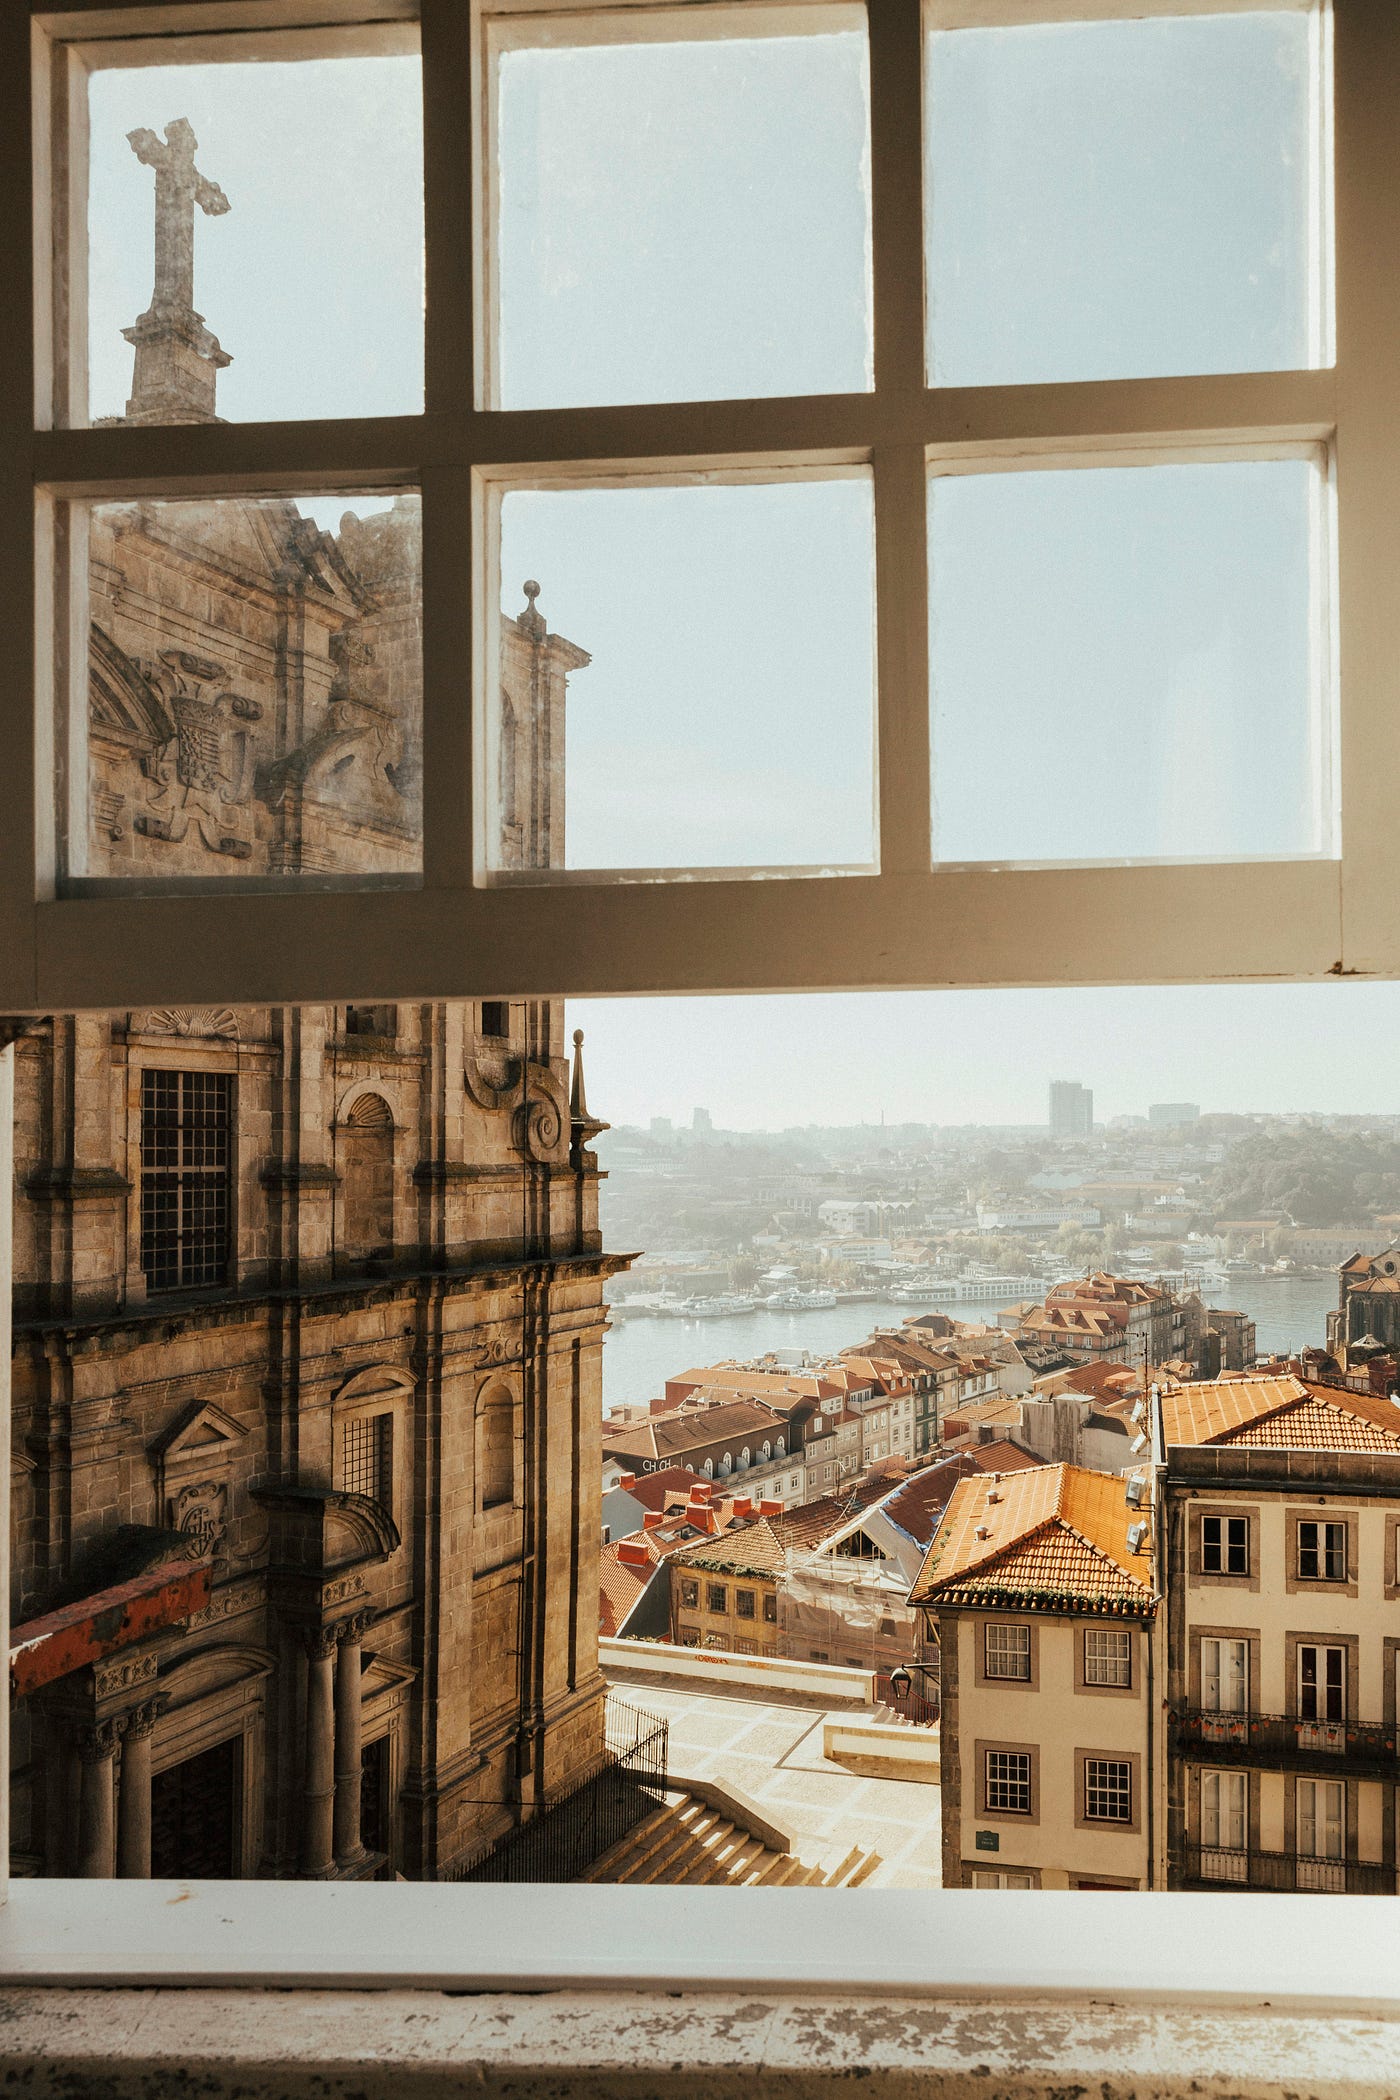 A view of a Portuguese city from a window. Portugal residents eat an Atlantic diet.